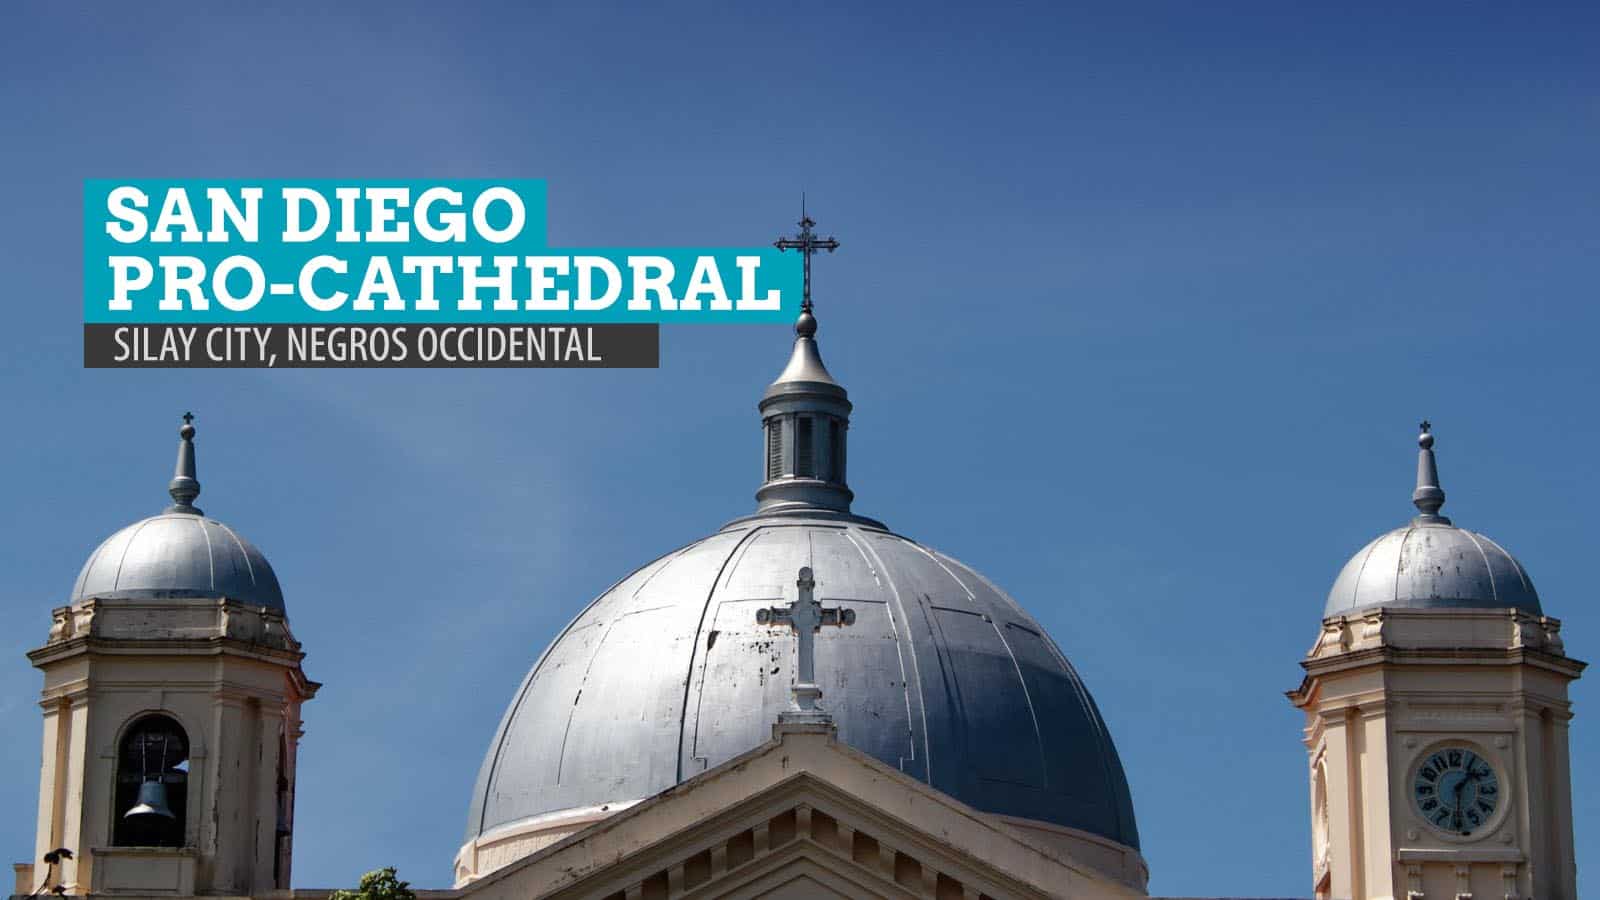 San Diego Pro-Cathedral, Silay City: The Domed Charmer of Negros Occidental